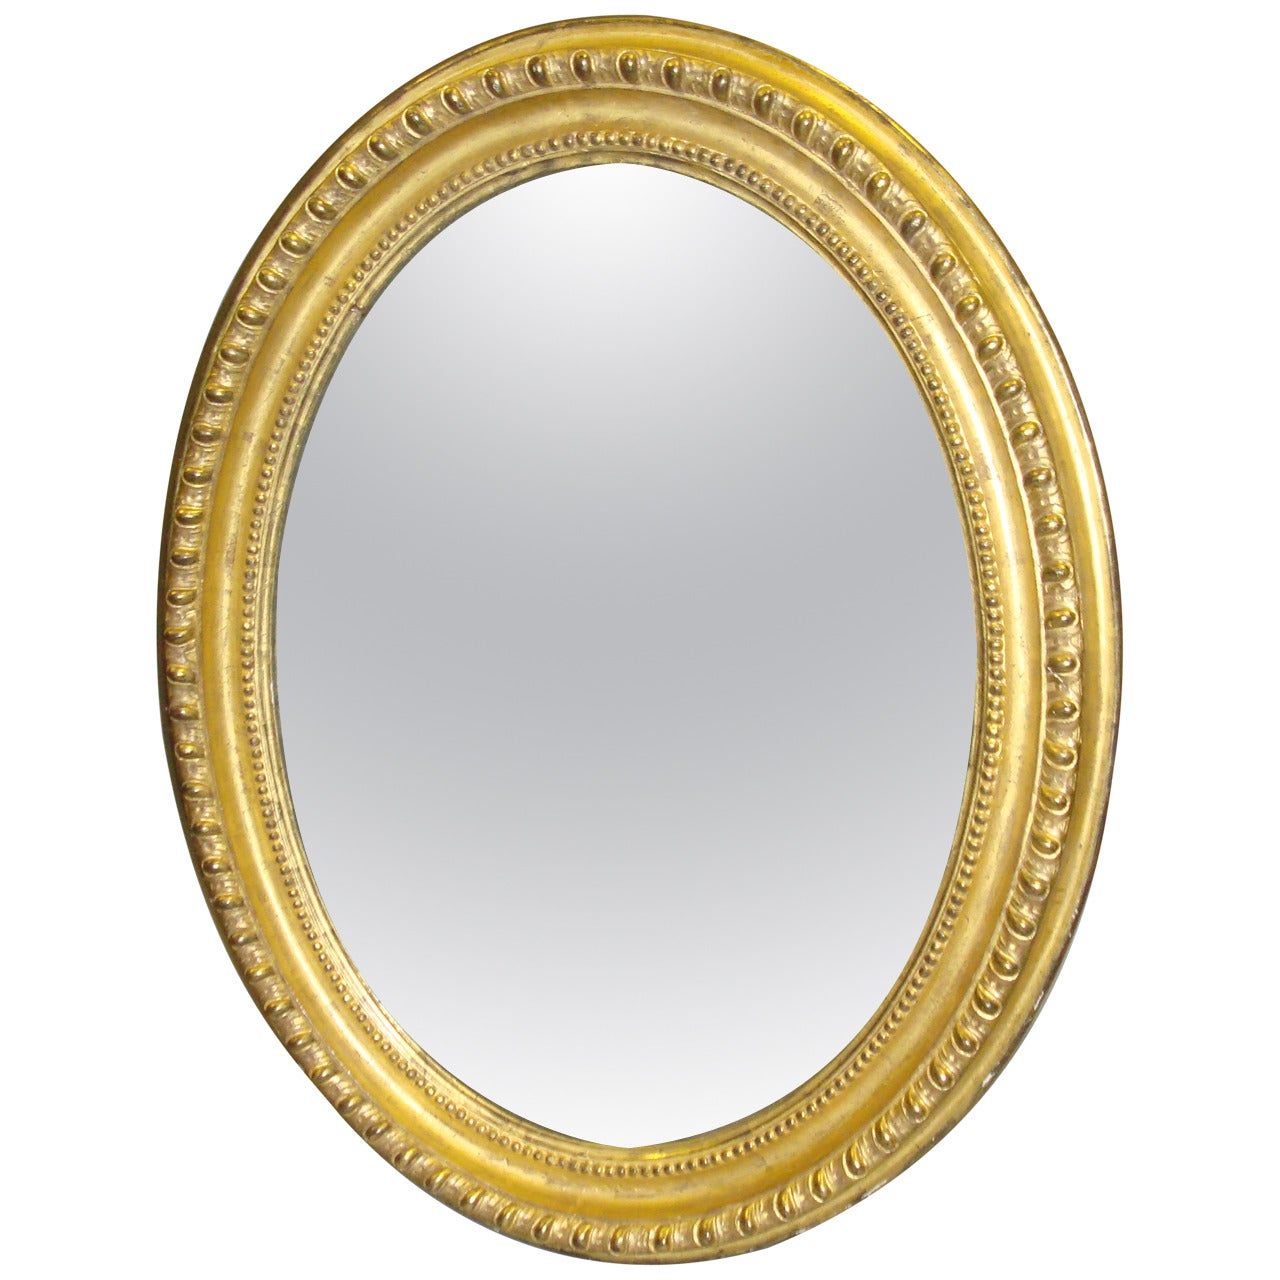 Early 19th Century Giltwood Oval Wall Mirror For Sale